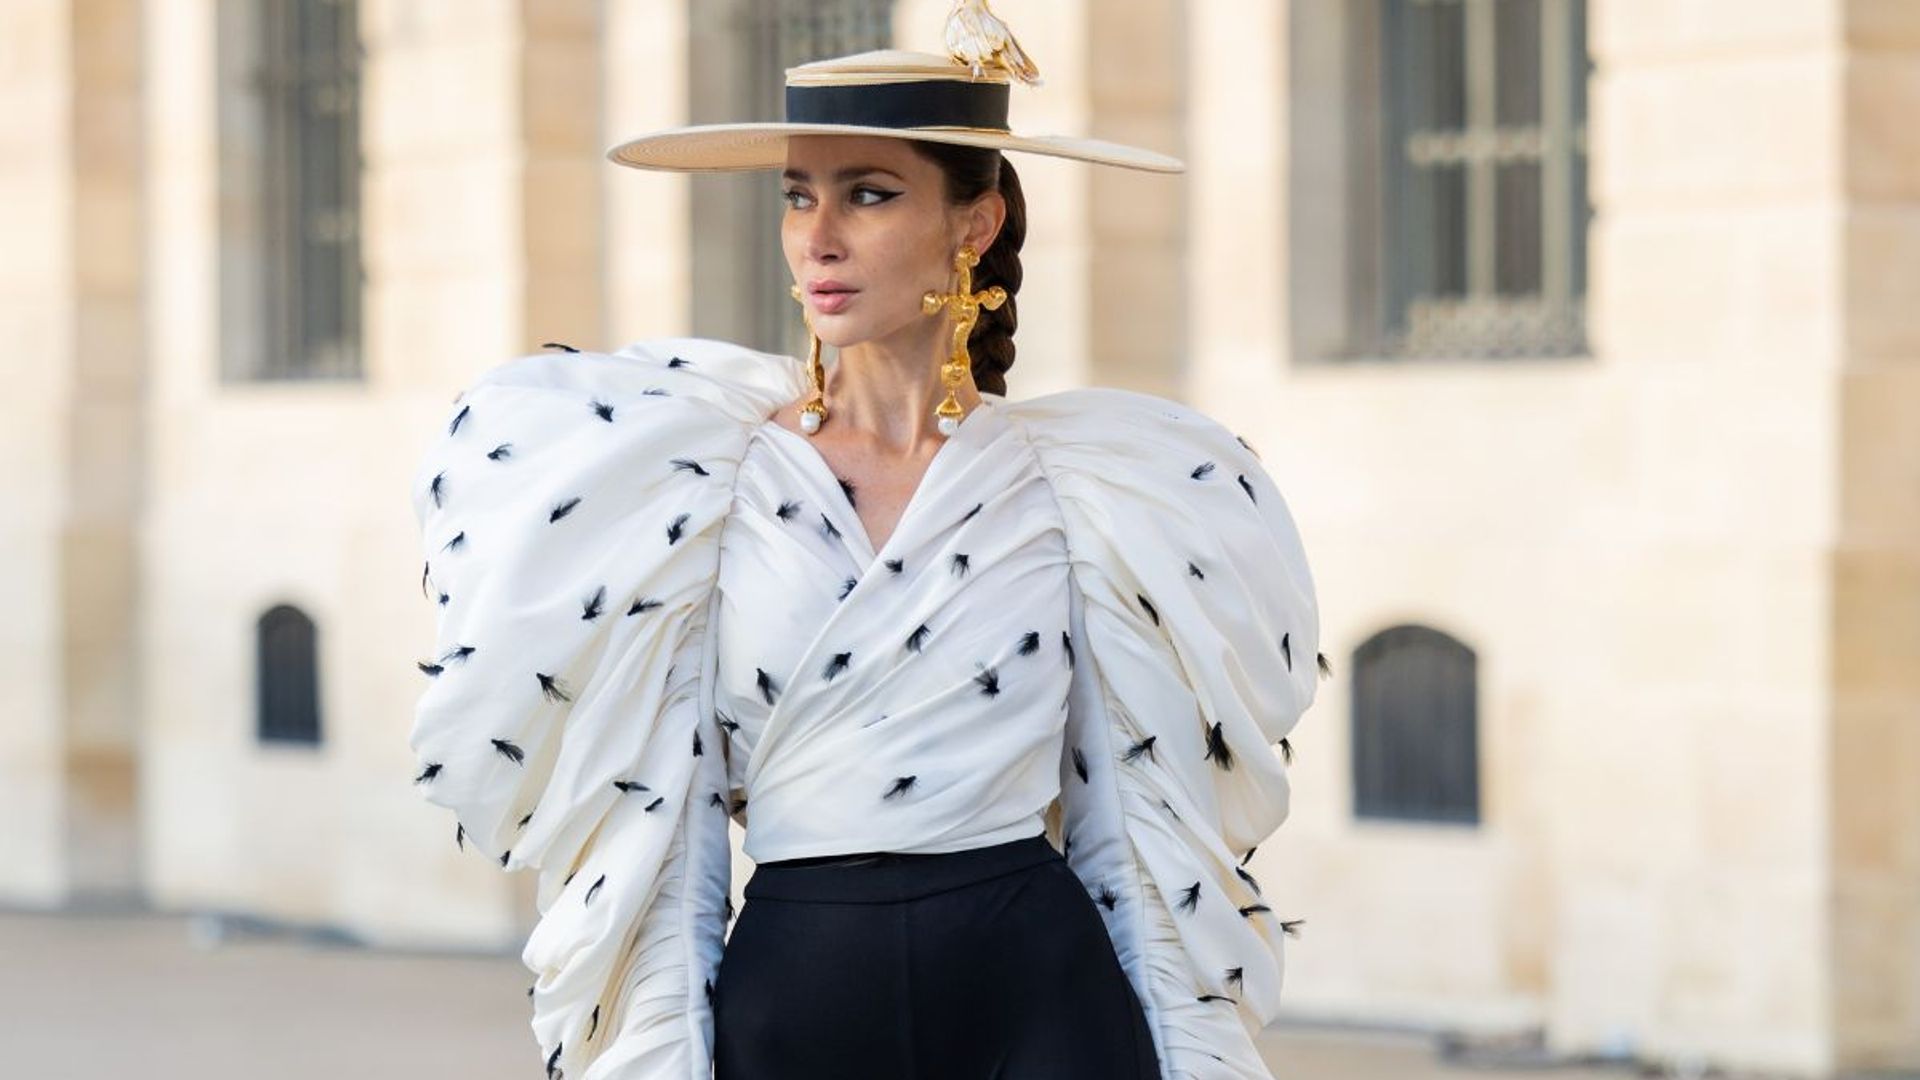 PHOTOS] Olivia Palermo's Best Shoe Looks at Paris Couture Week